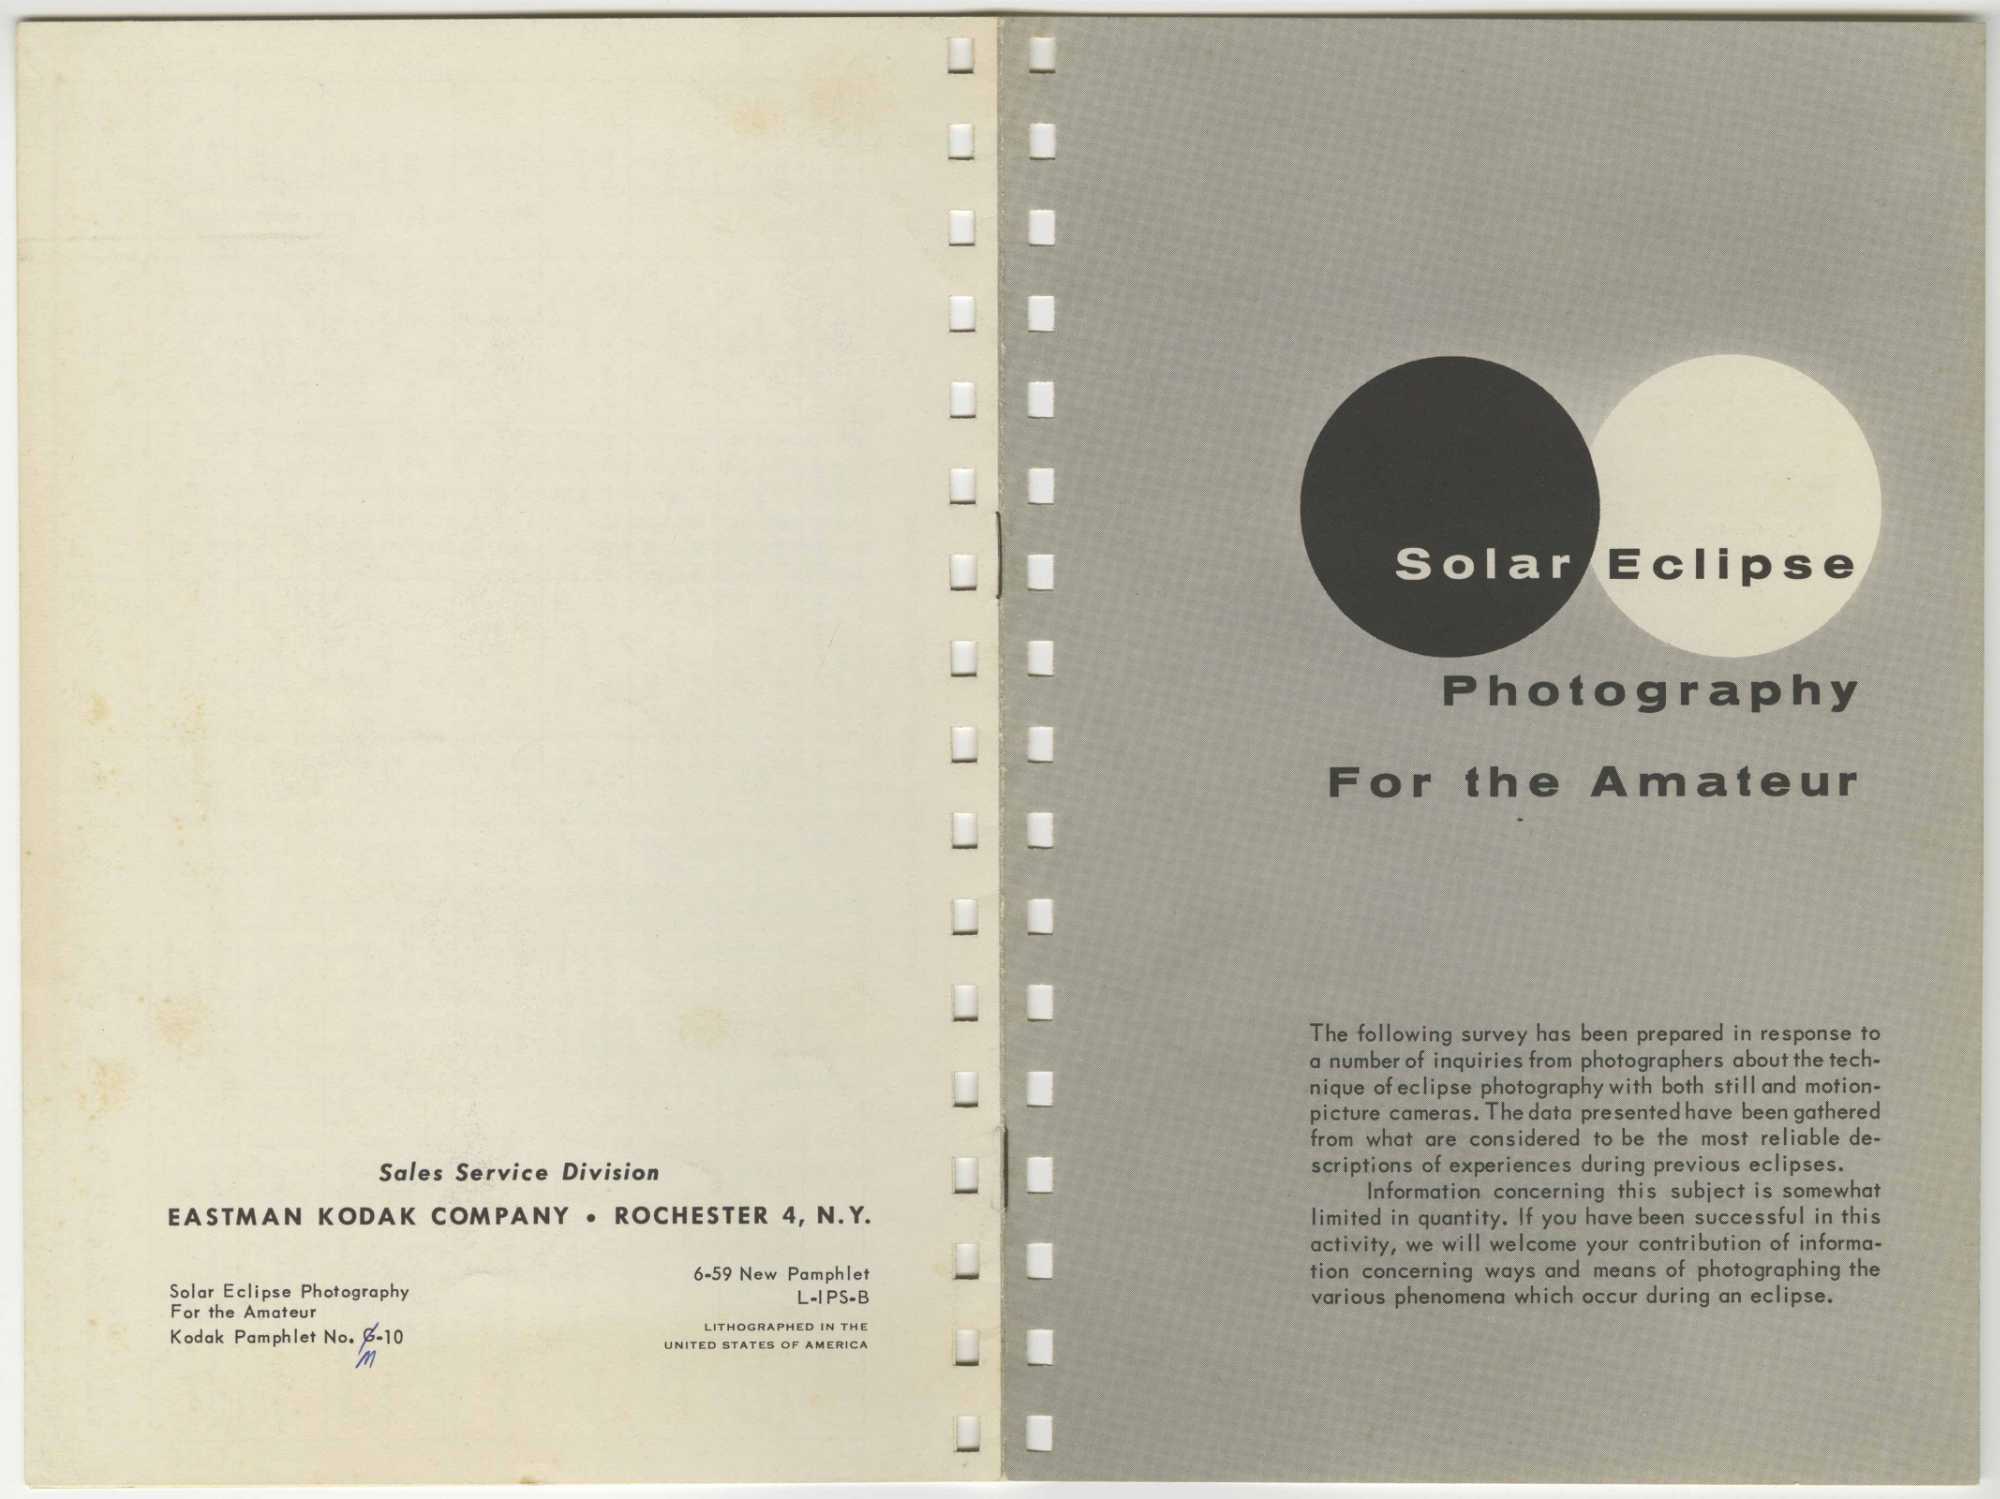 Front and back covers of a black and white pamphlet produced by the Eastman Kodak Company about solar eclipse photography.